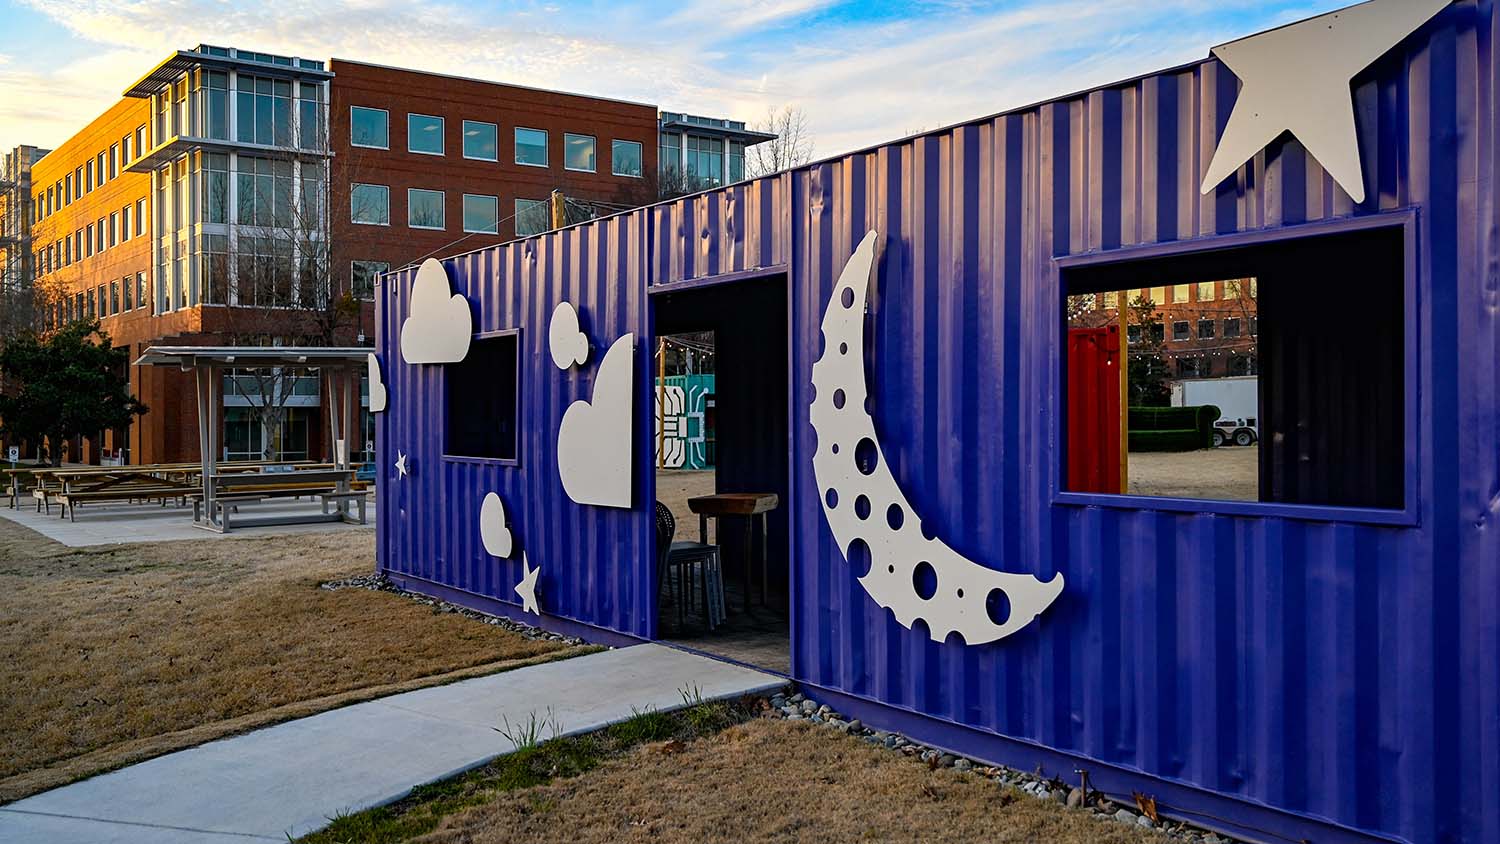 An exterior view of the indigo container in The Corner, covered in illustrations of the stars and moon.